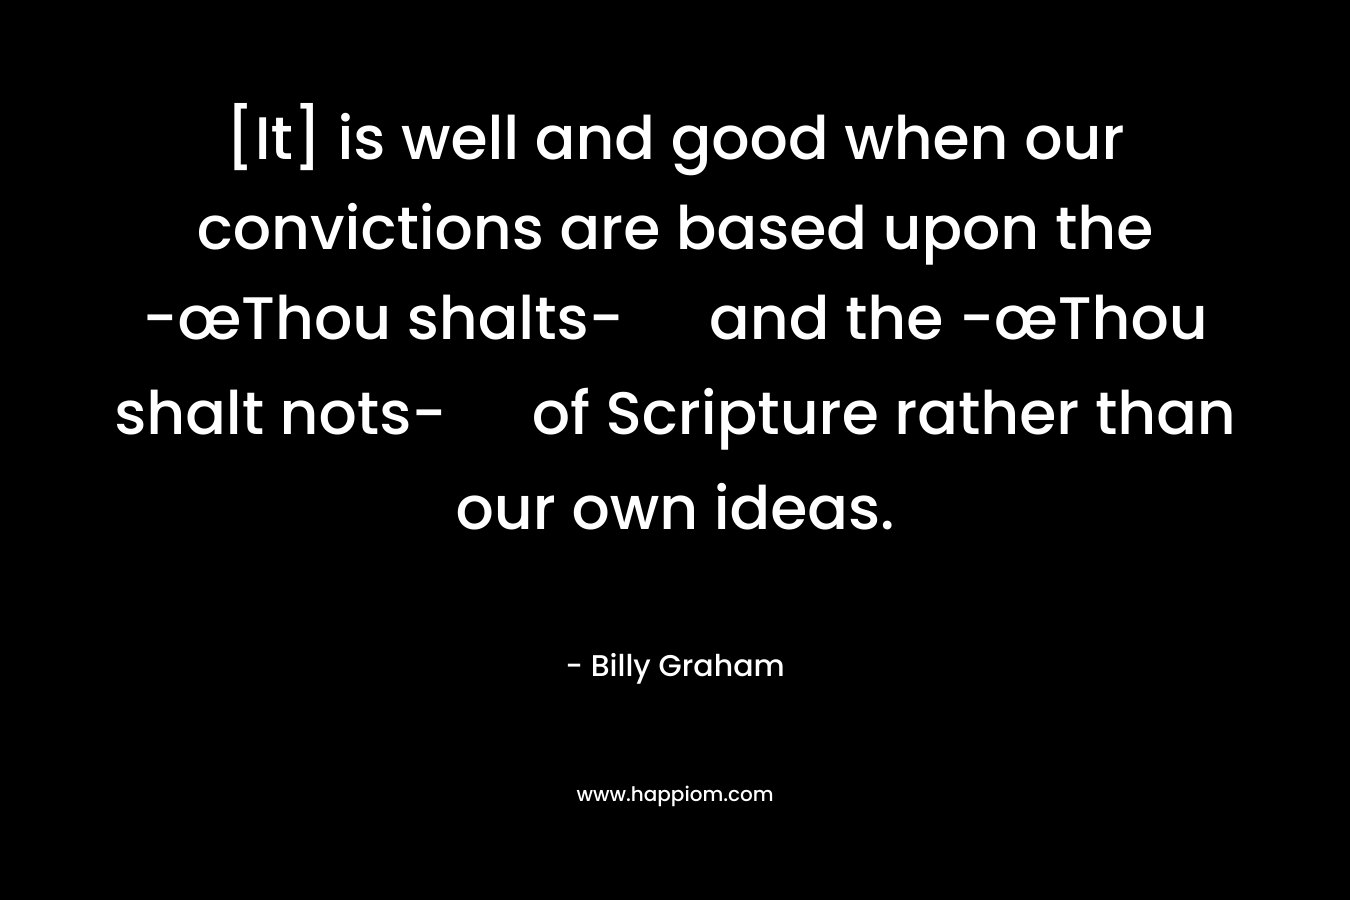 [It] is well and good when our convictions are based upon the -œThou shalts- and the -œThou shalt nots- of Scripture rather than our own ideas. – Billy Graham